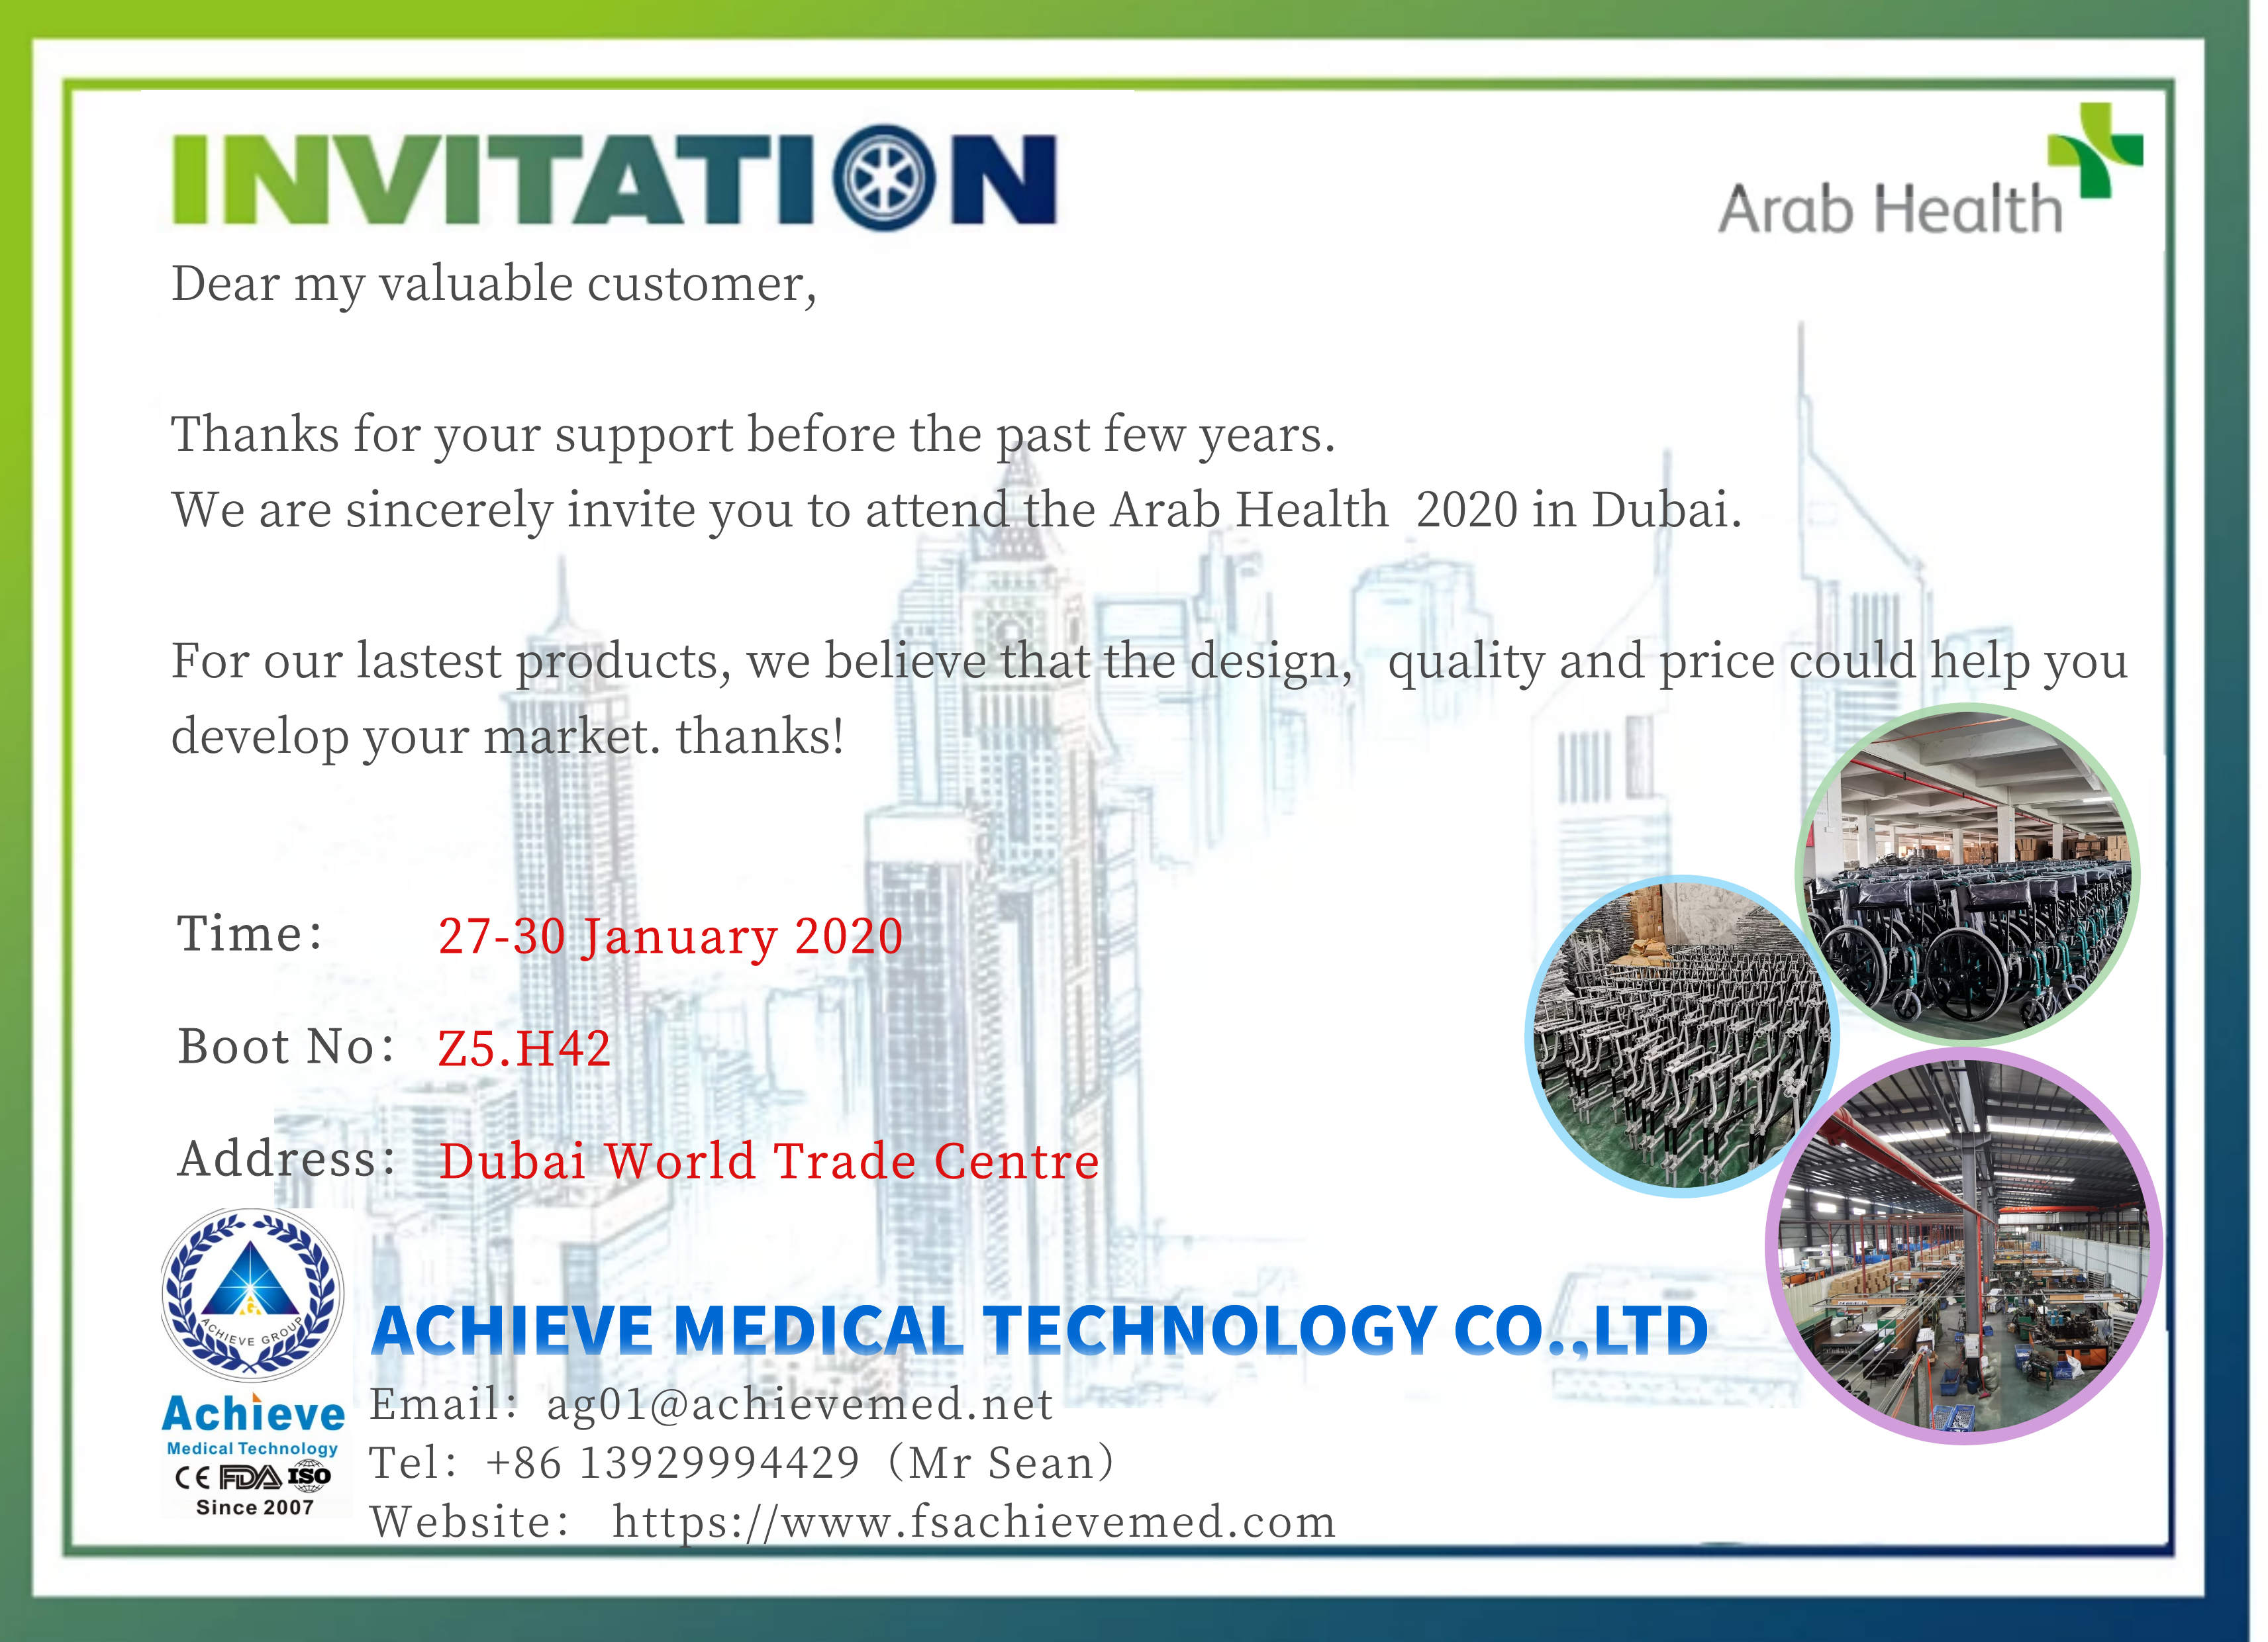 Sincerely invite you to the exhibition -- Arab Health 2020